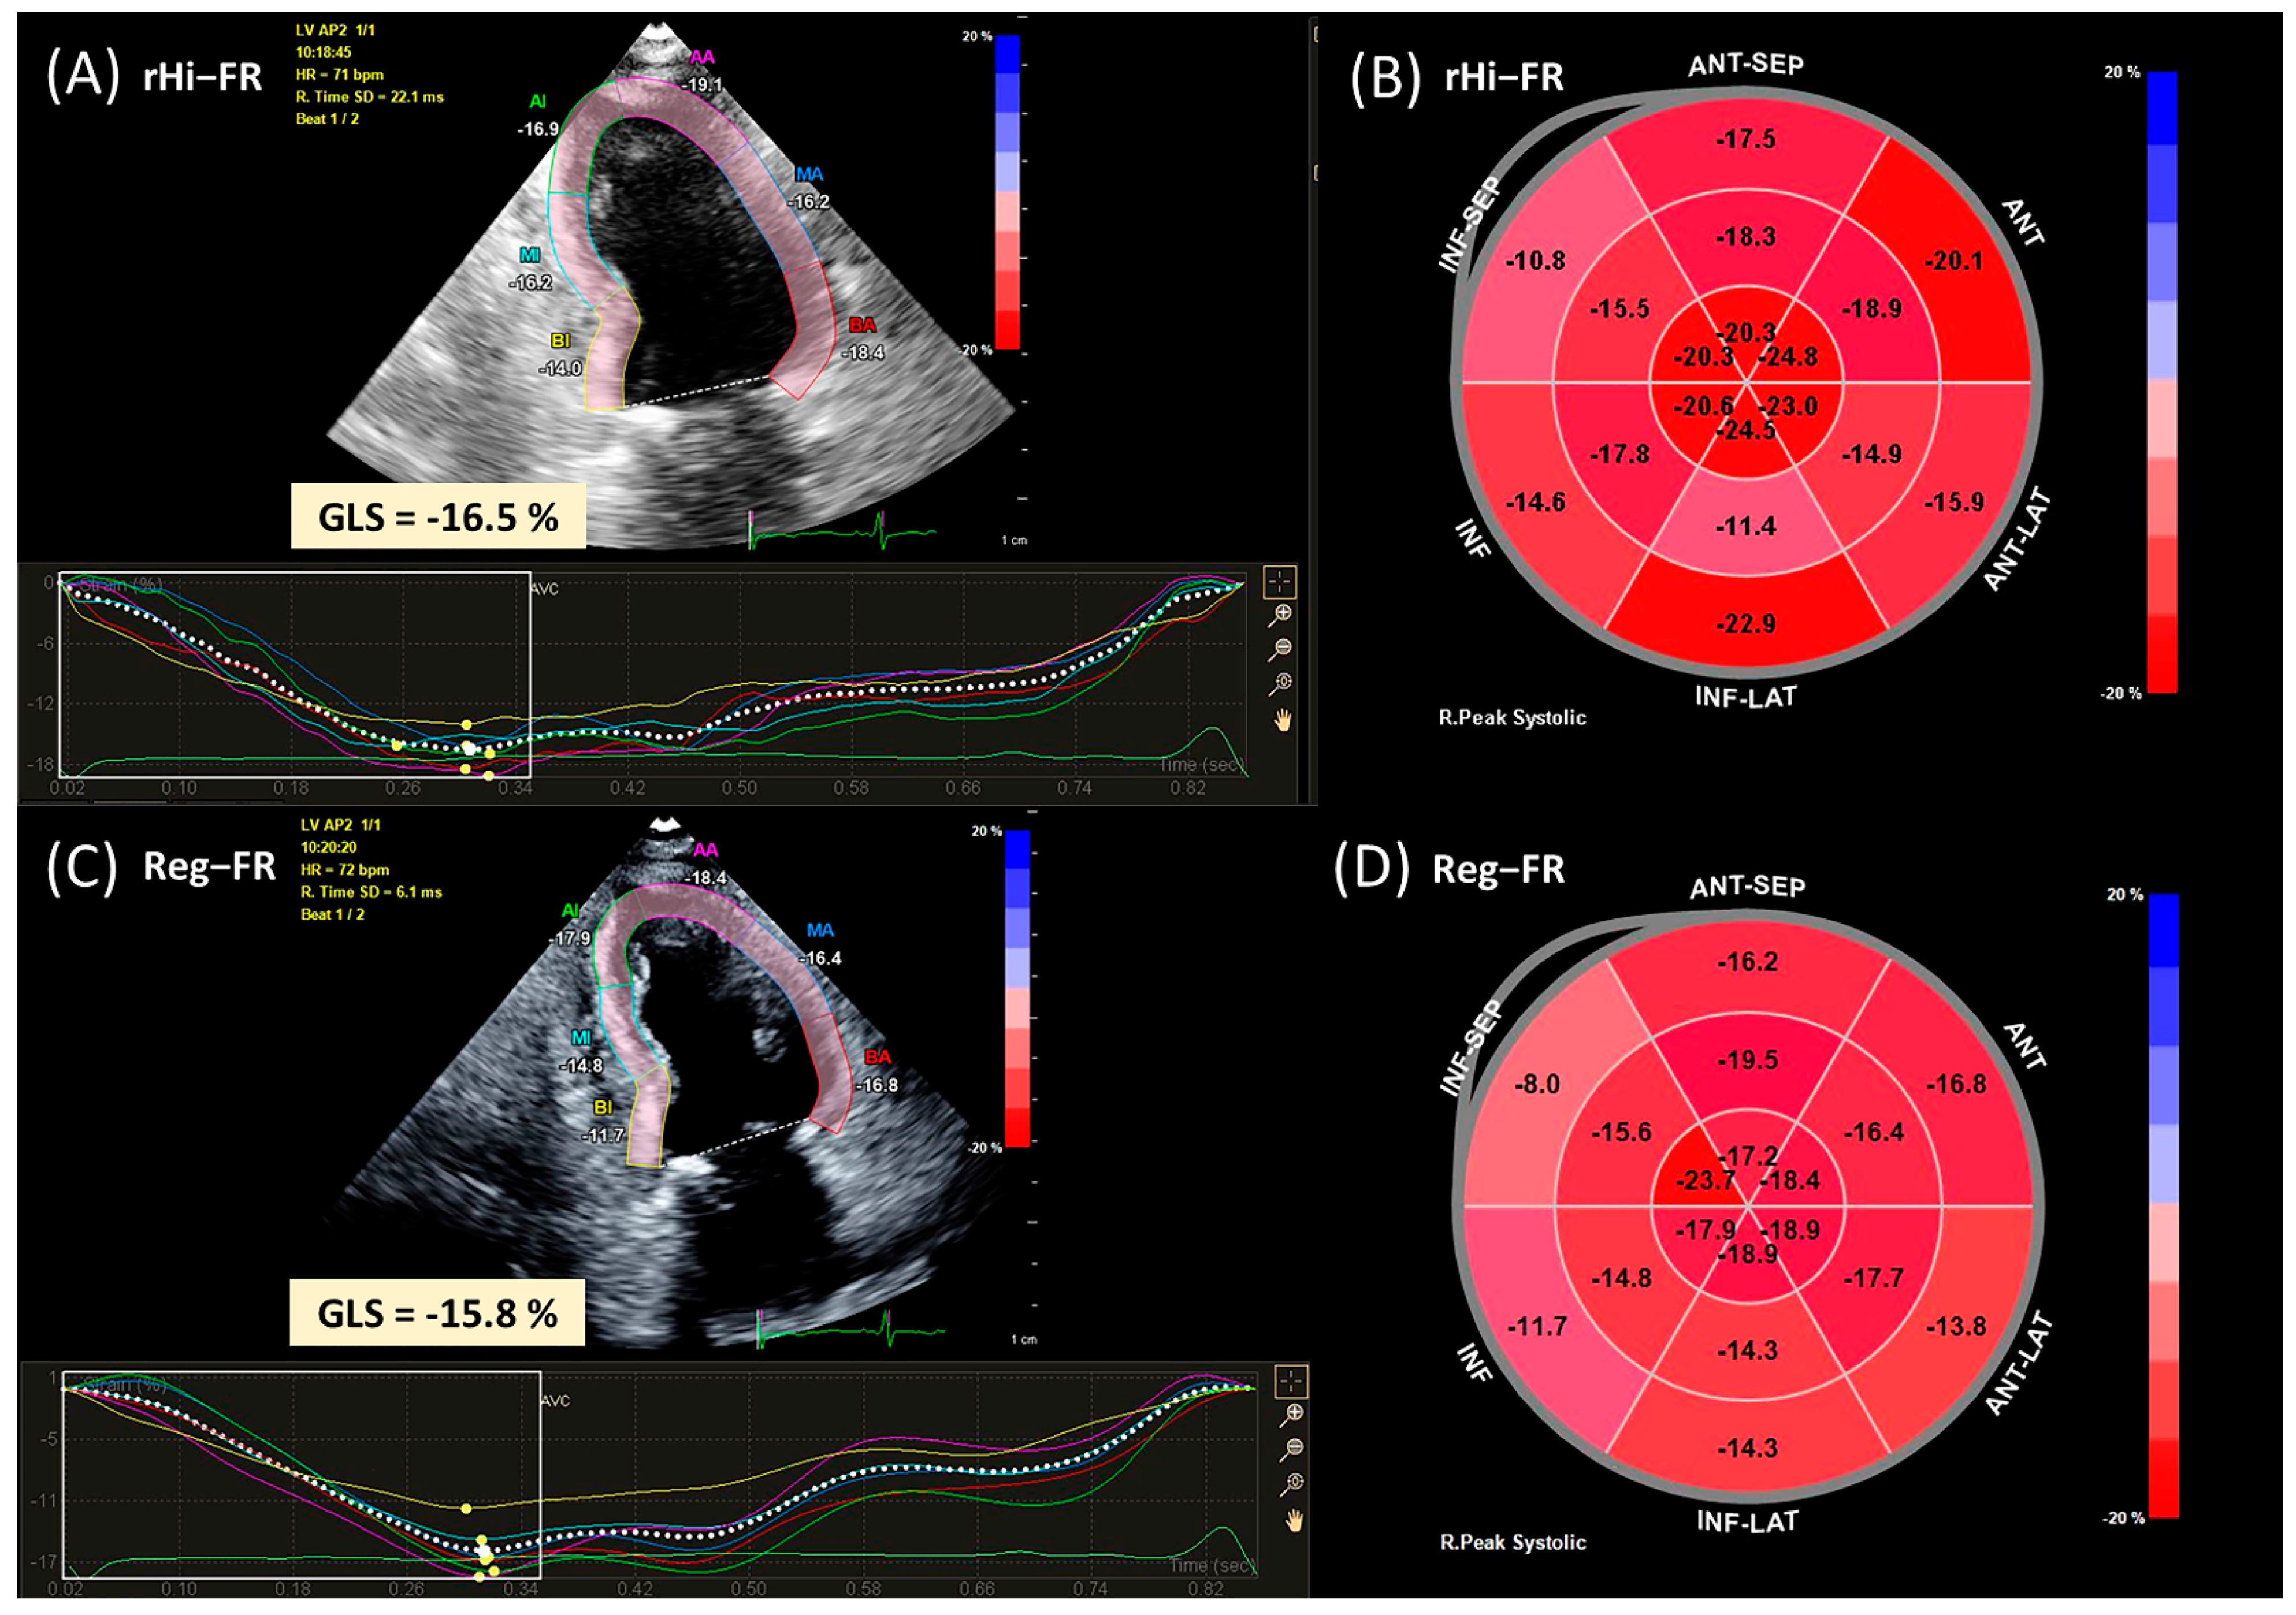 Evaluation of Subclinical LV Systolic Dysfunction by GLS Using 2D-STE